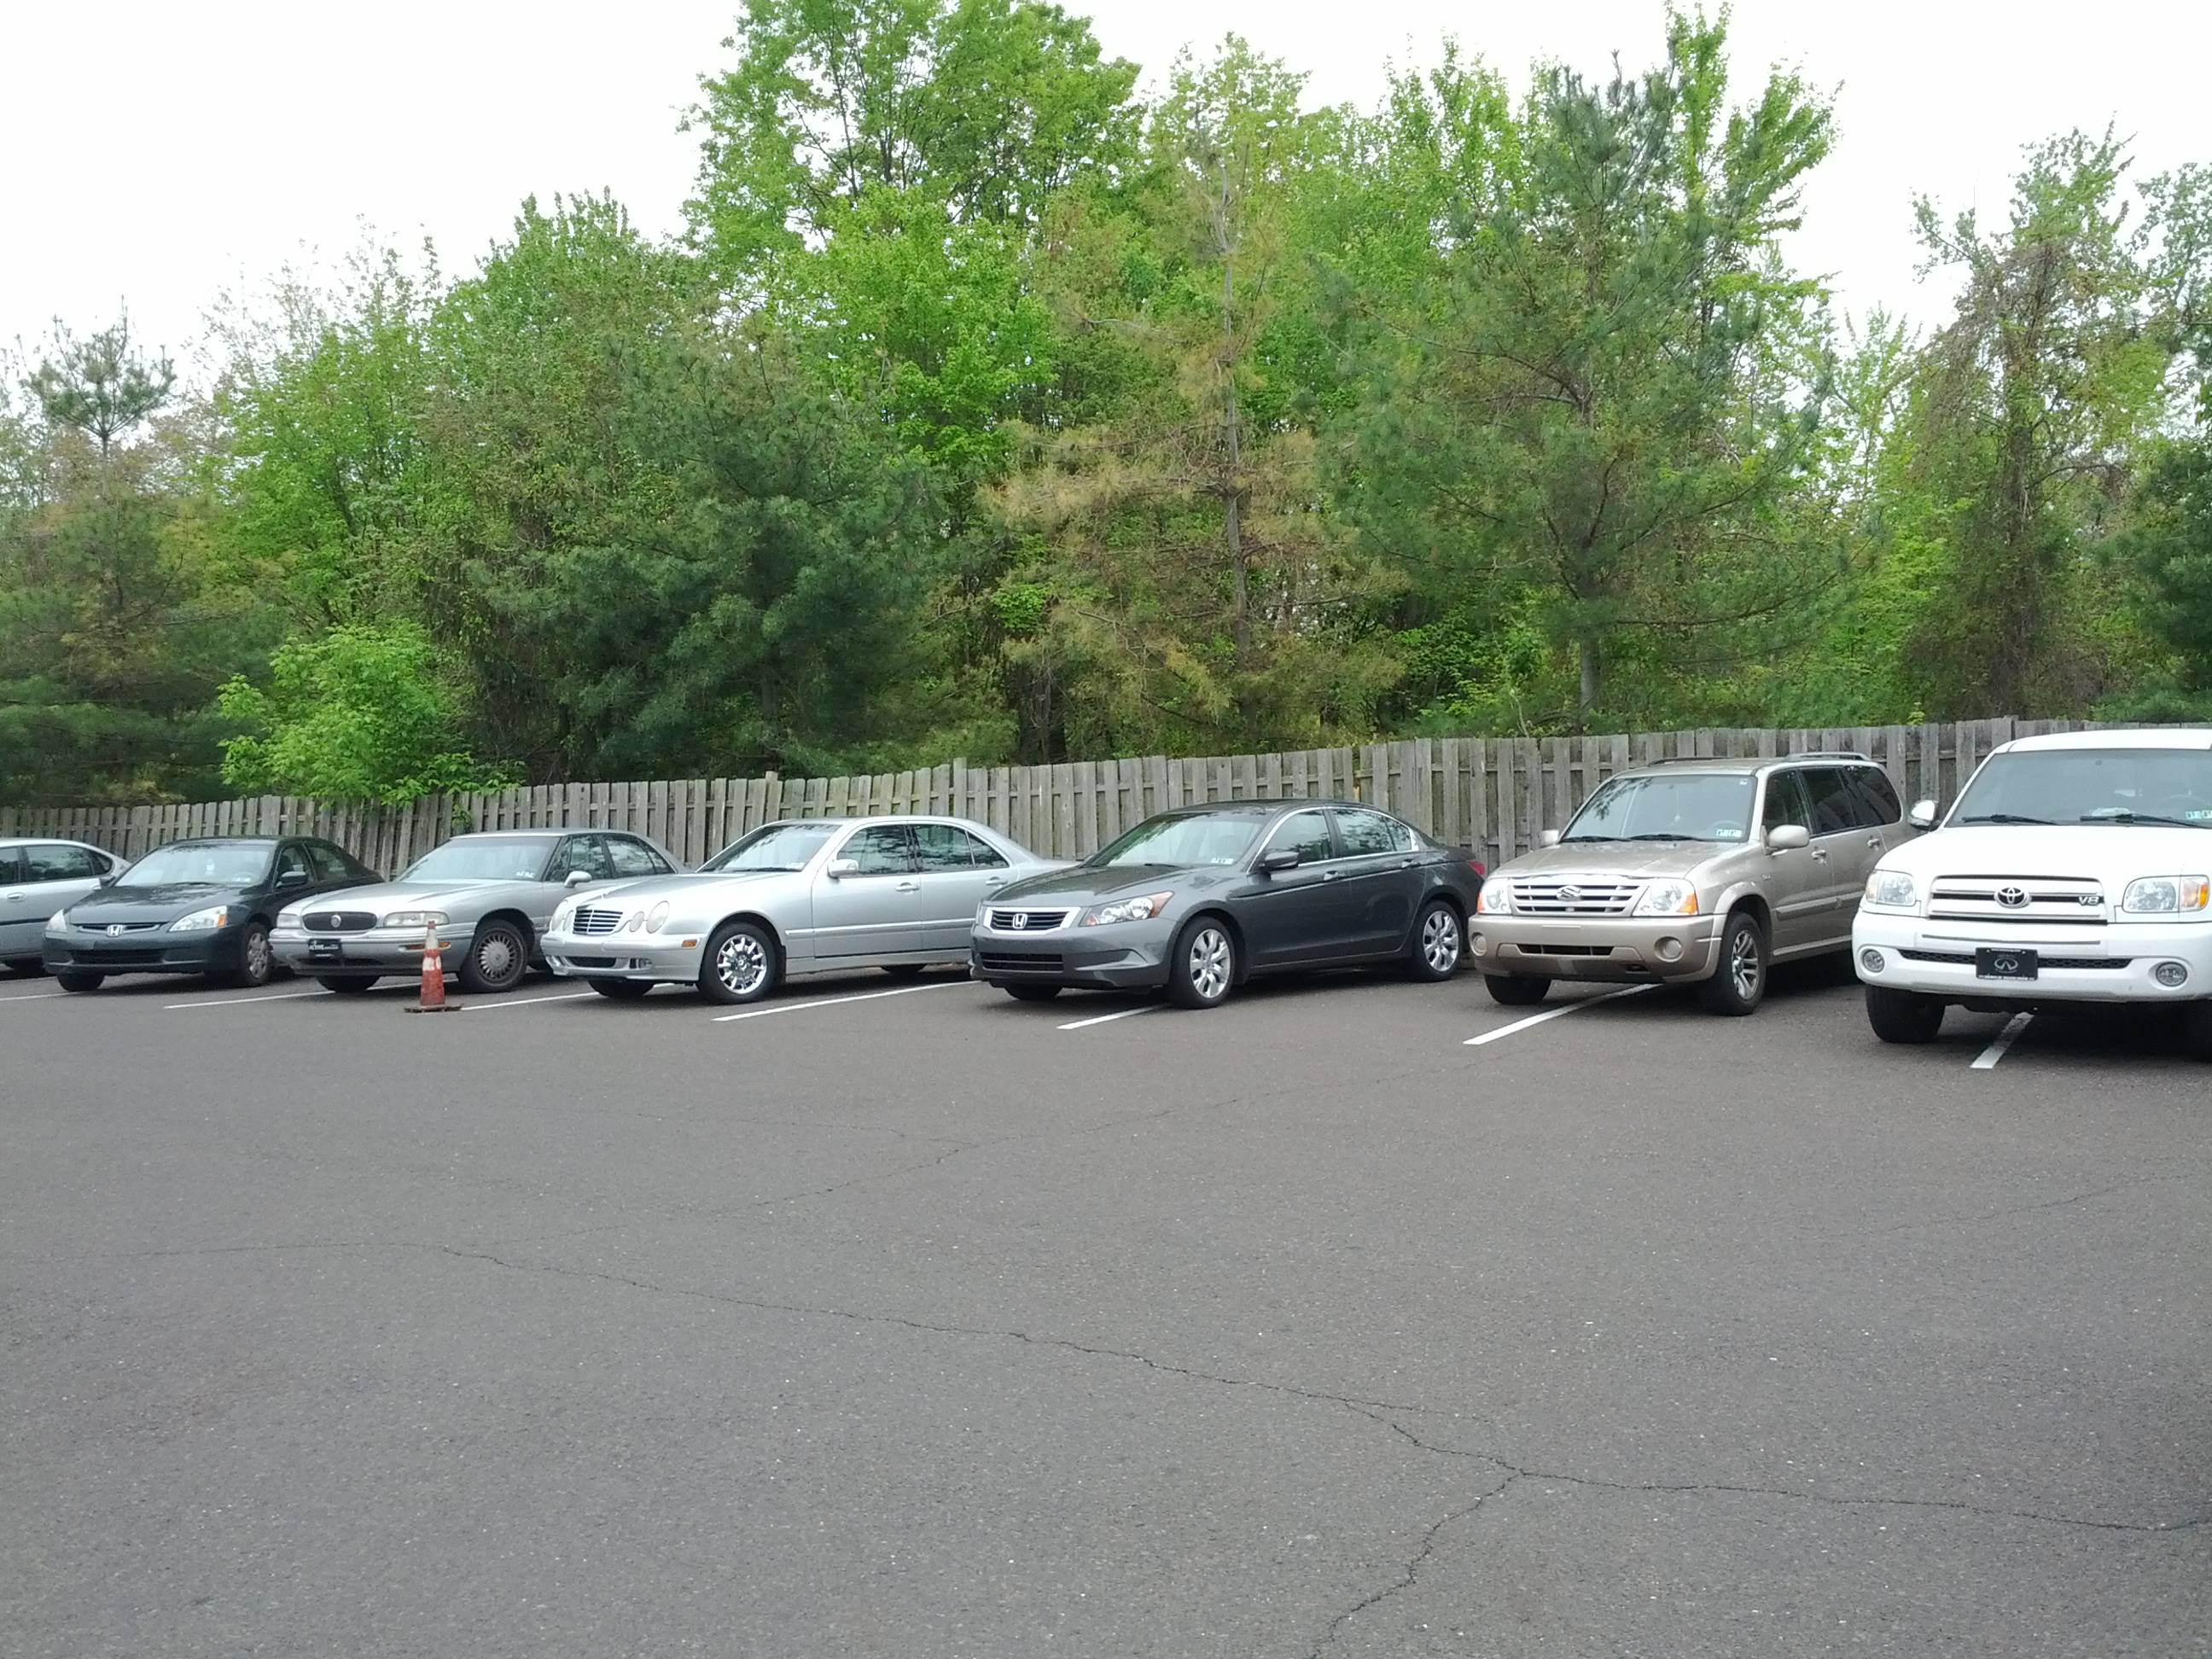 21 Times Someone Was A Parking Master, Or A Parking Disaster